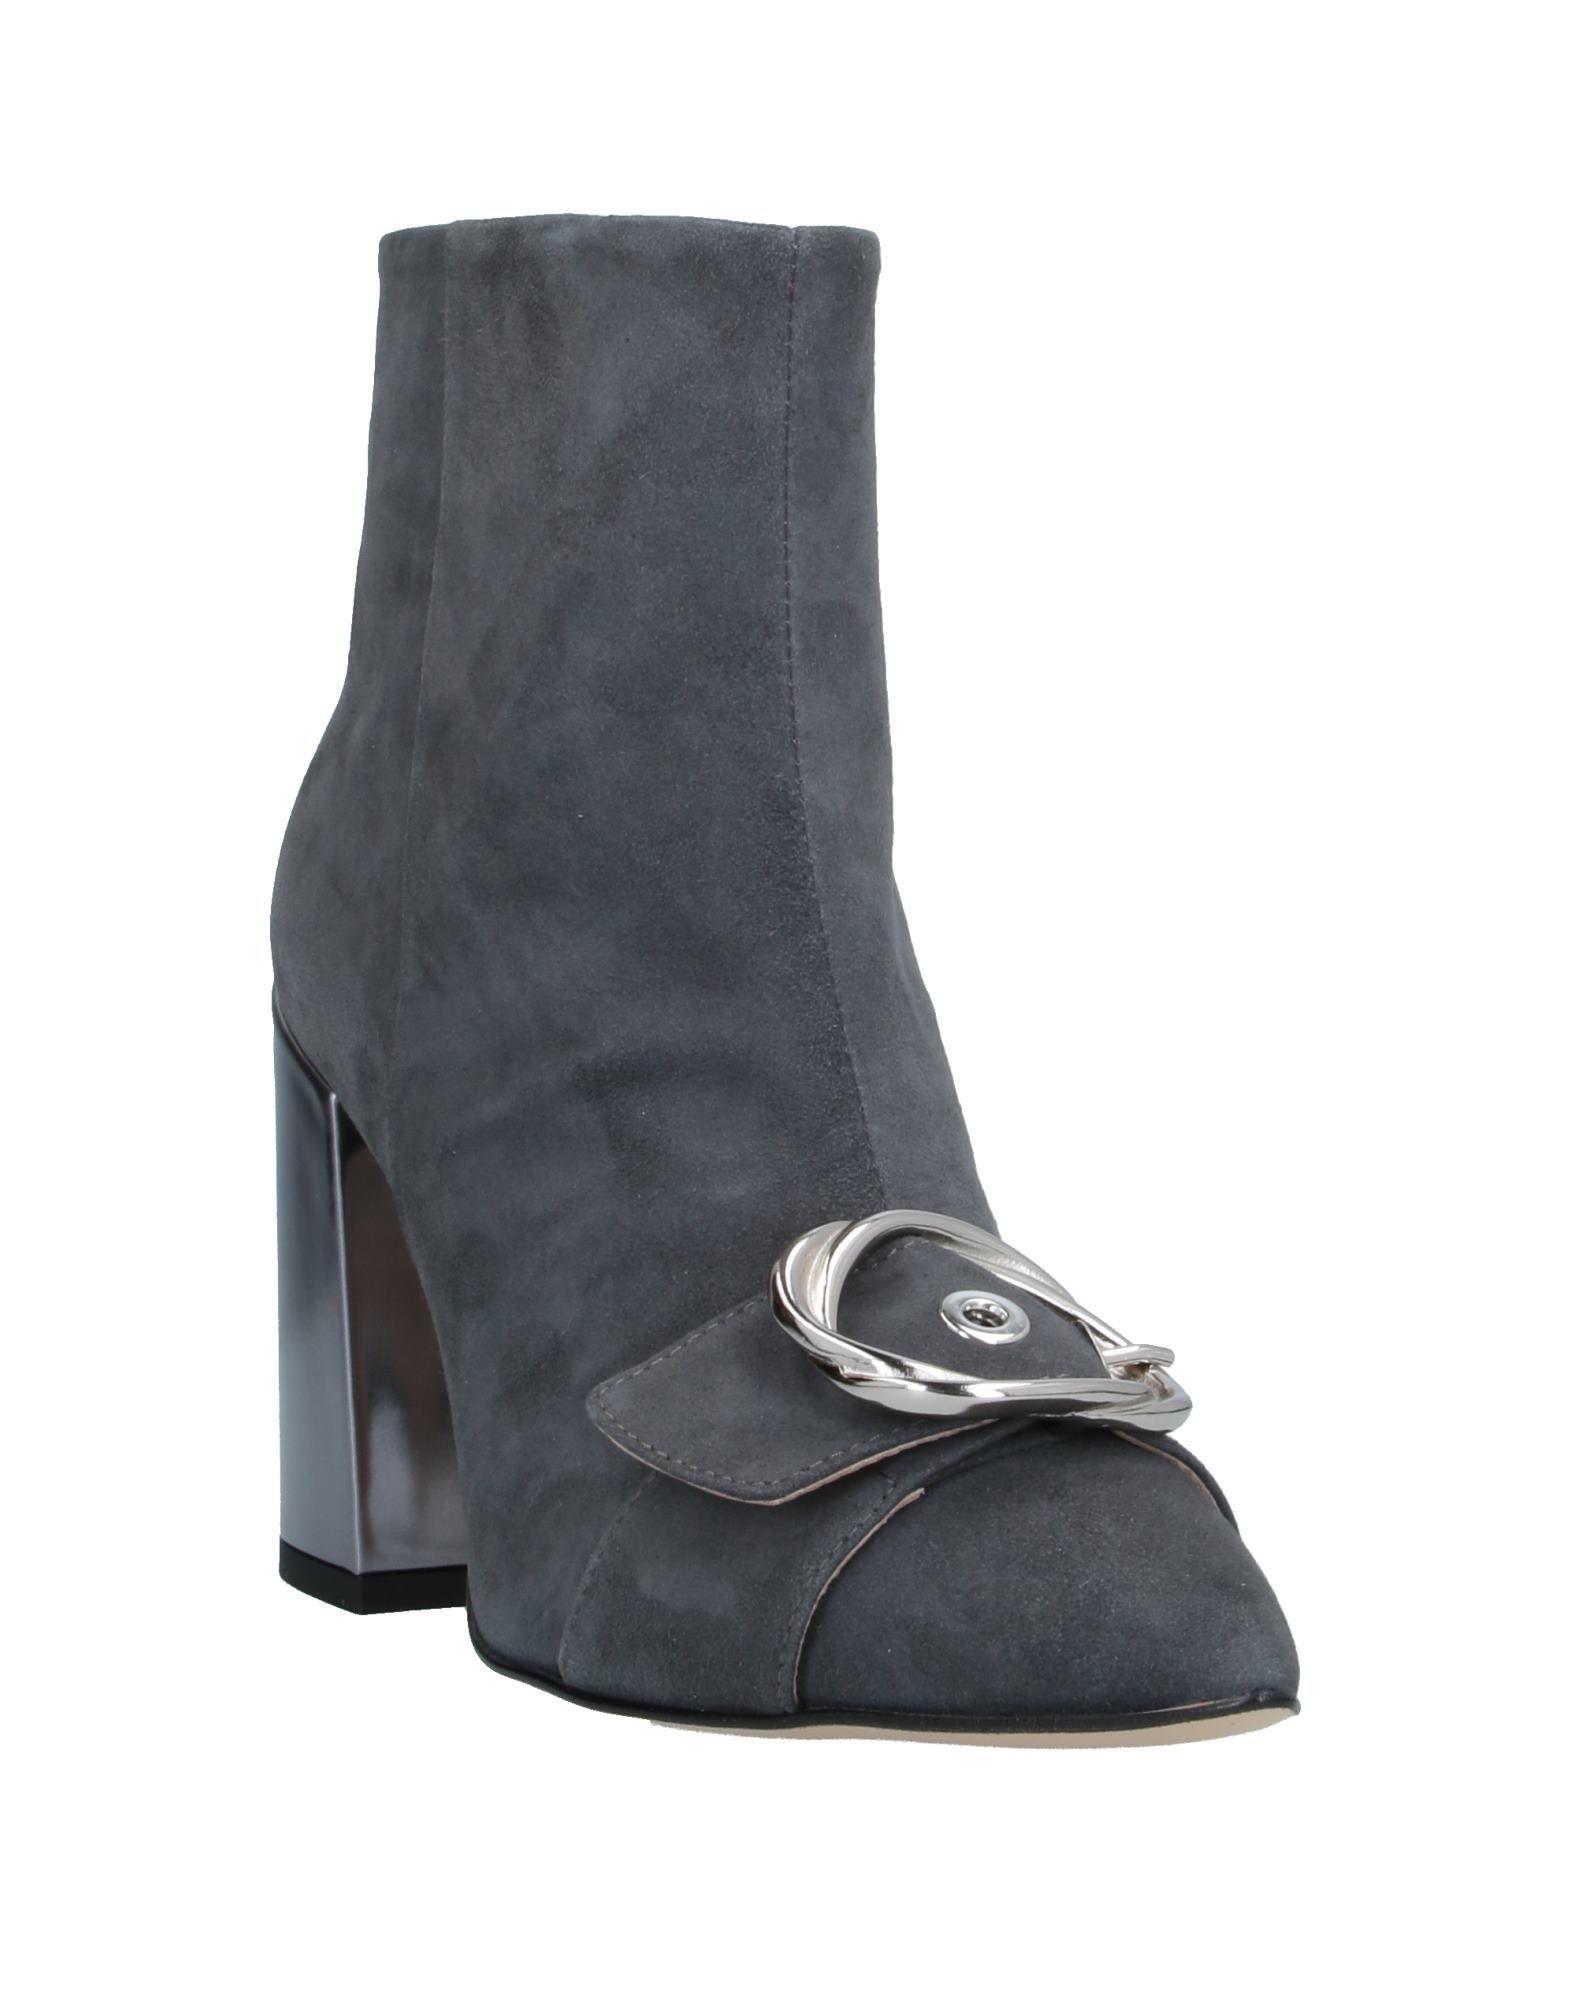 F.lli Bruglia Suede Ankle Boots in Grey (Gray) - Lyst